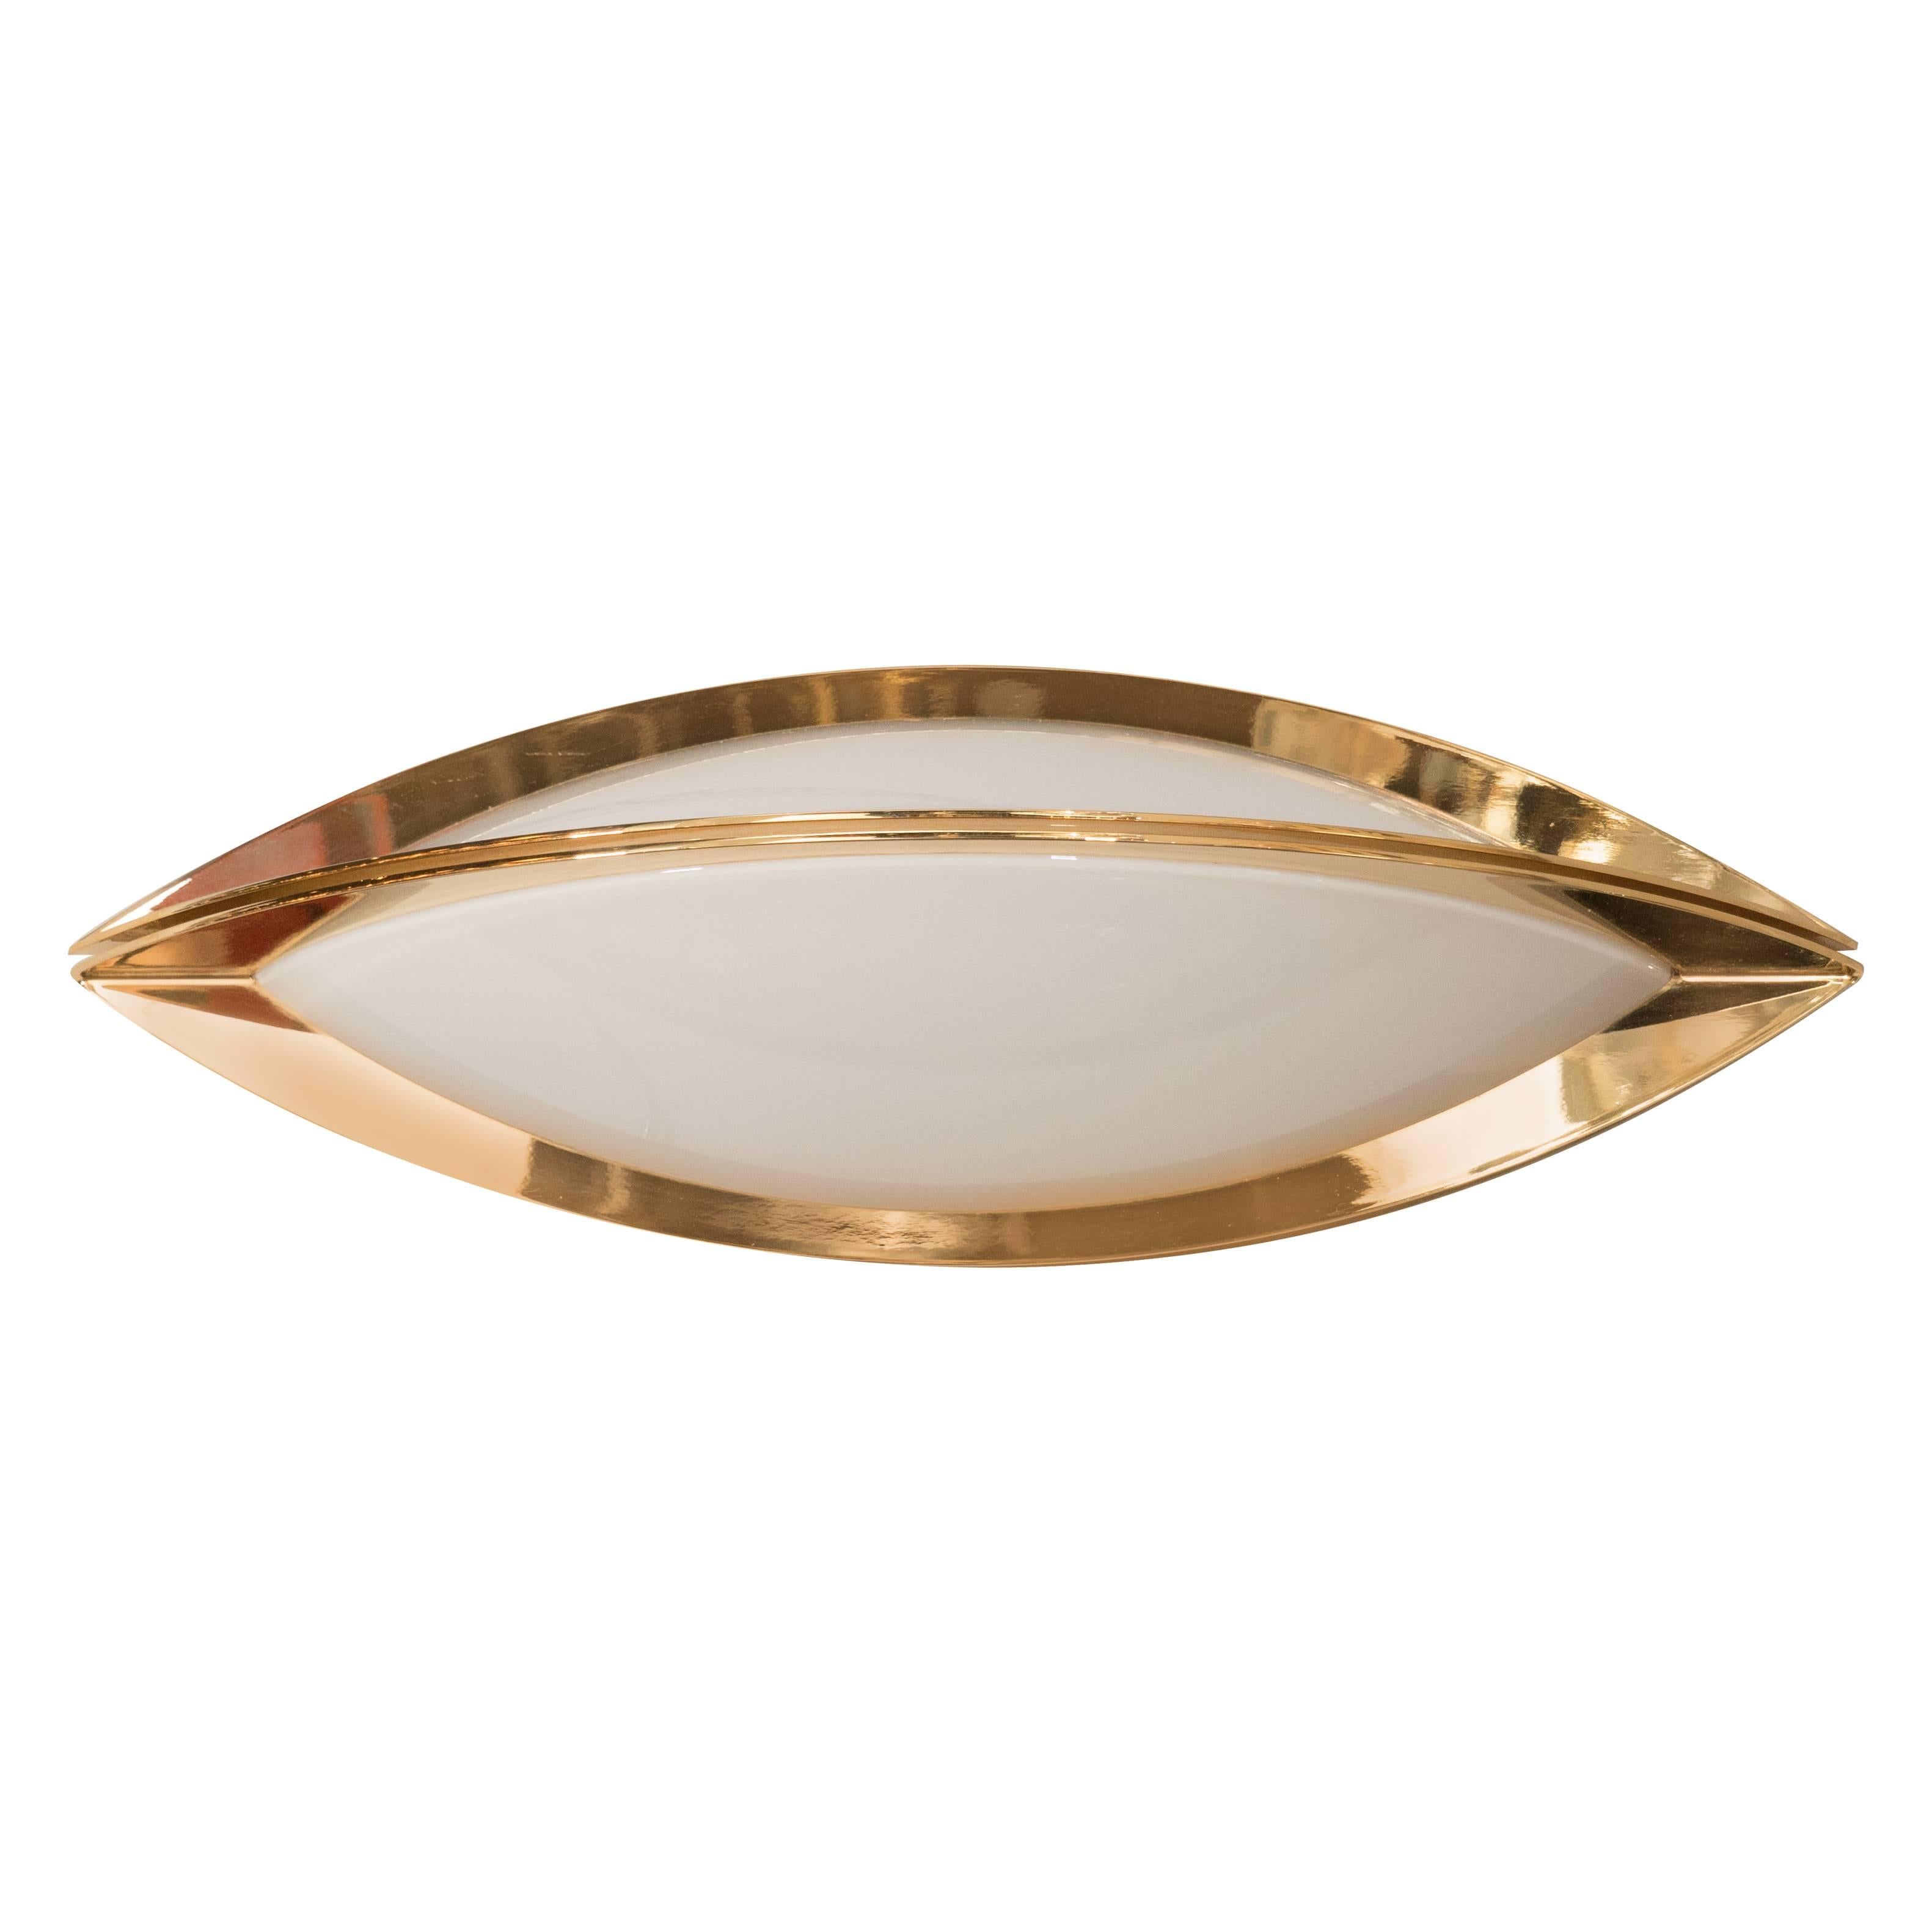 Mid-Century Modern Vanity Sconce in Brass and Frosted Glass by Glashütte Limburg